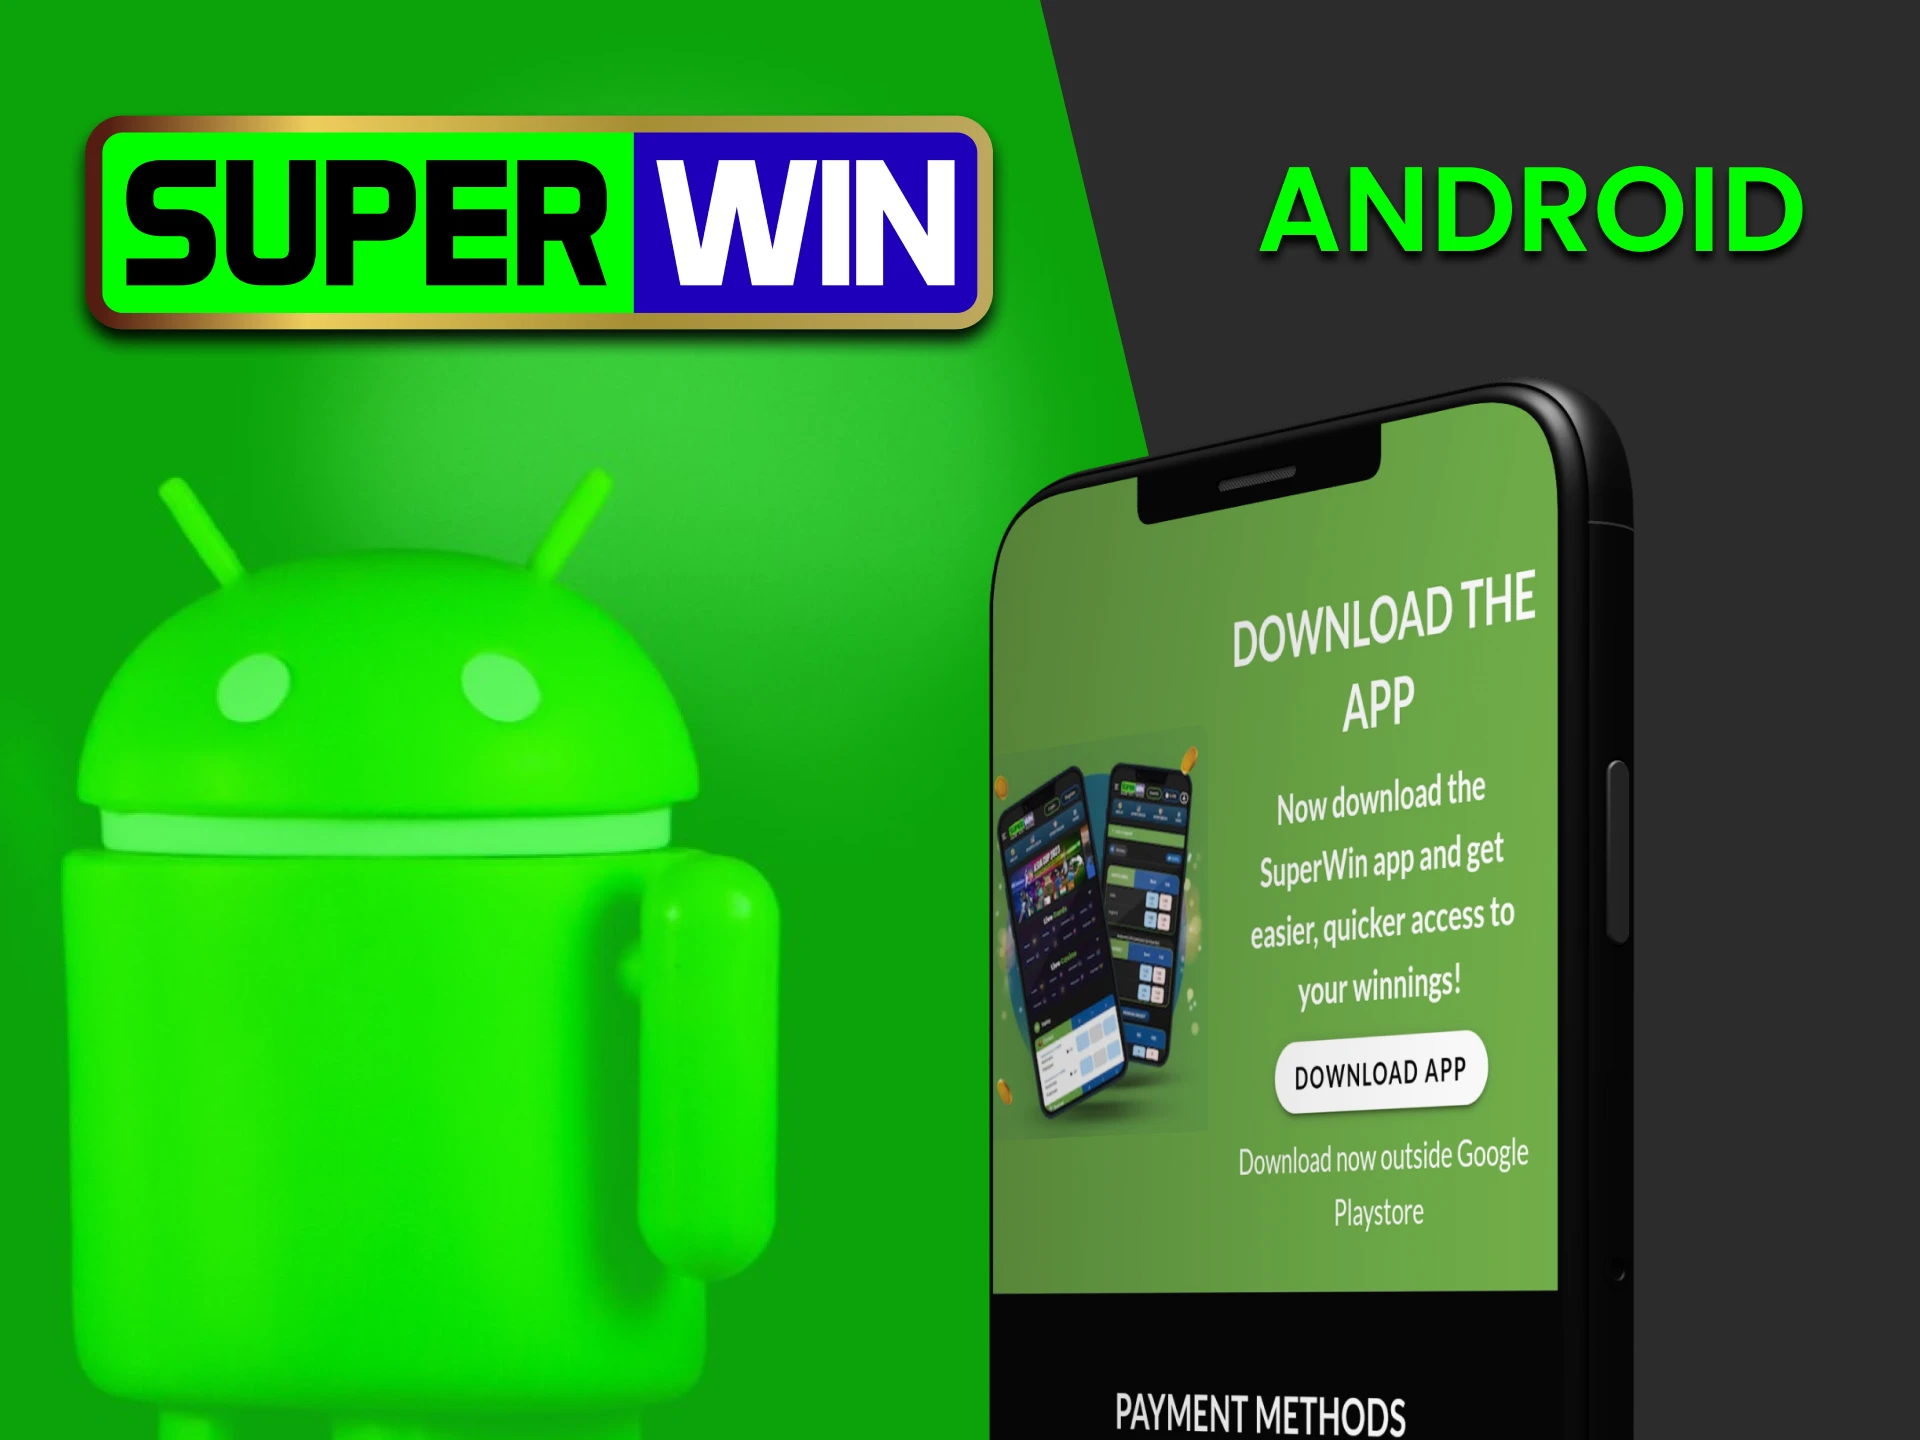 Install the Superwin application for Android devices.